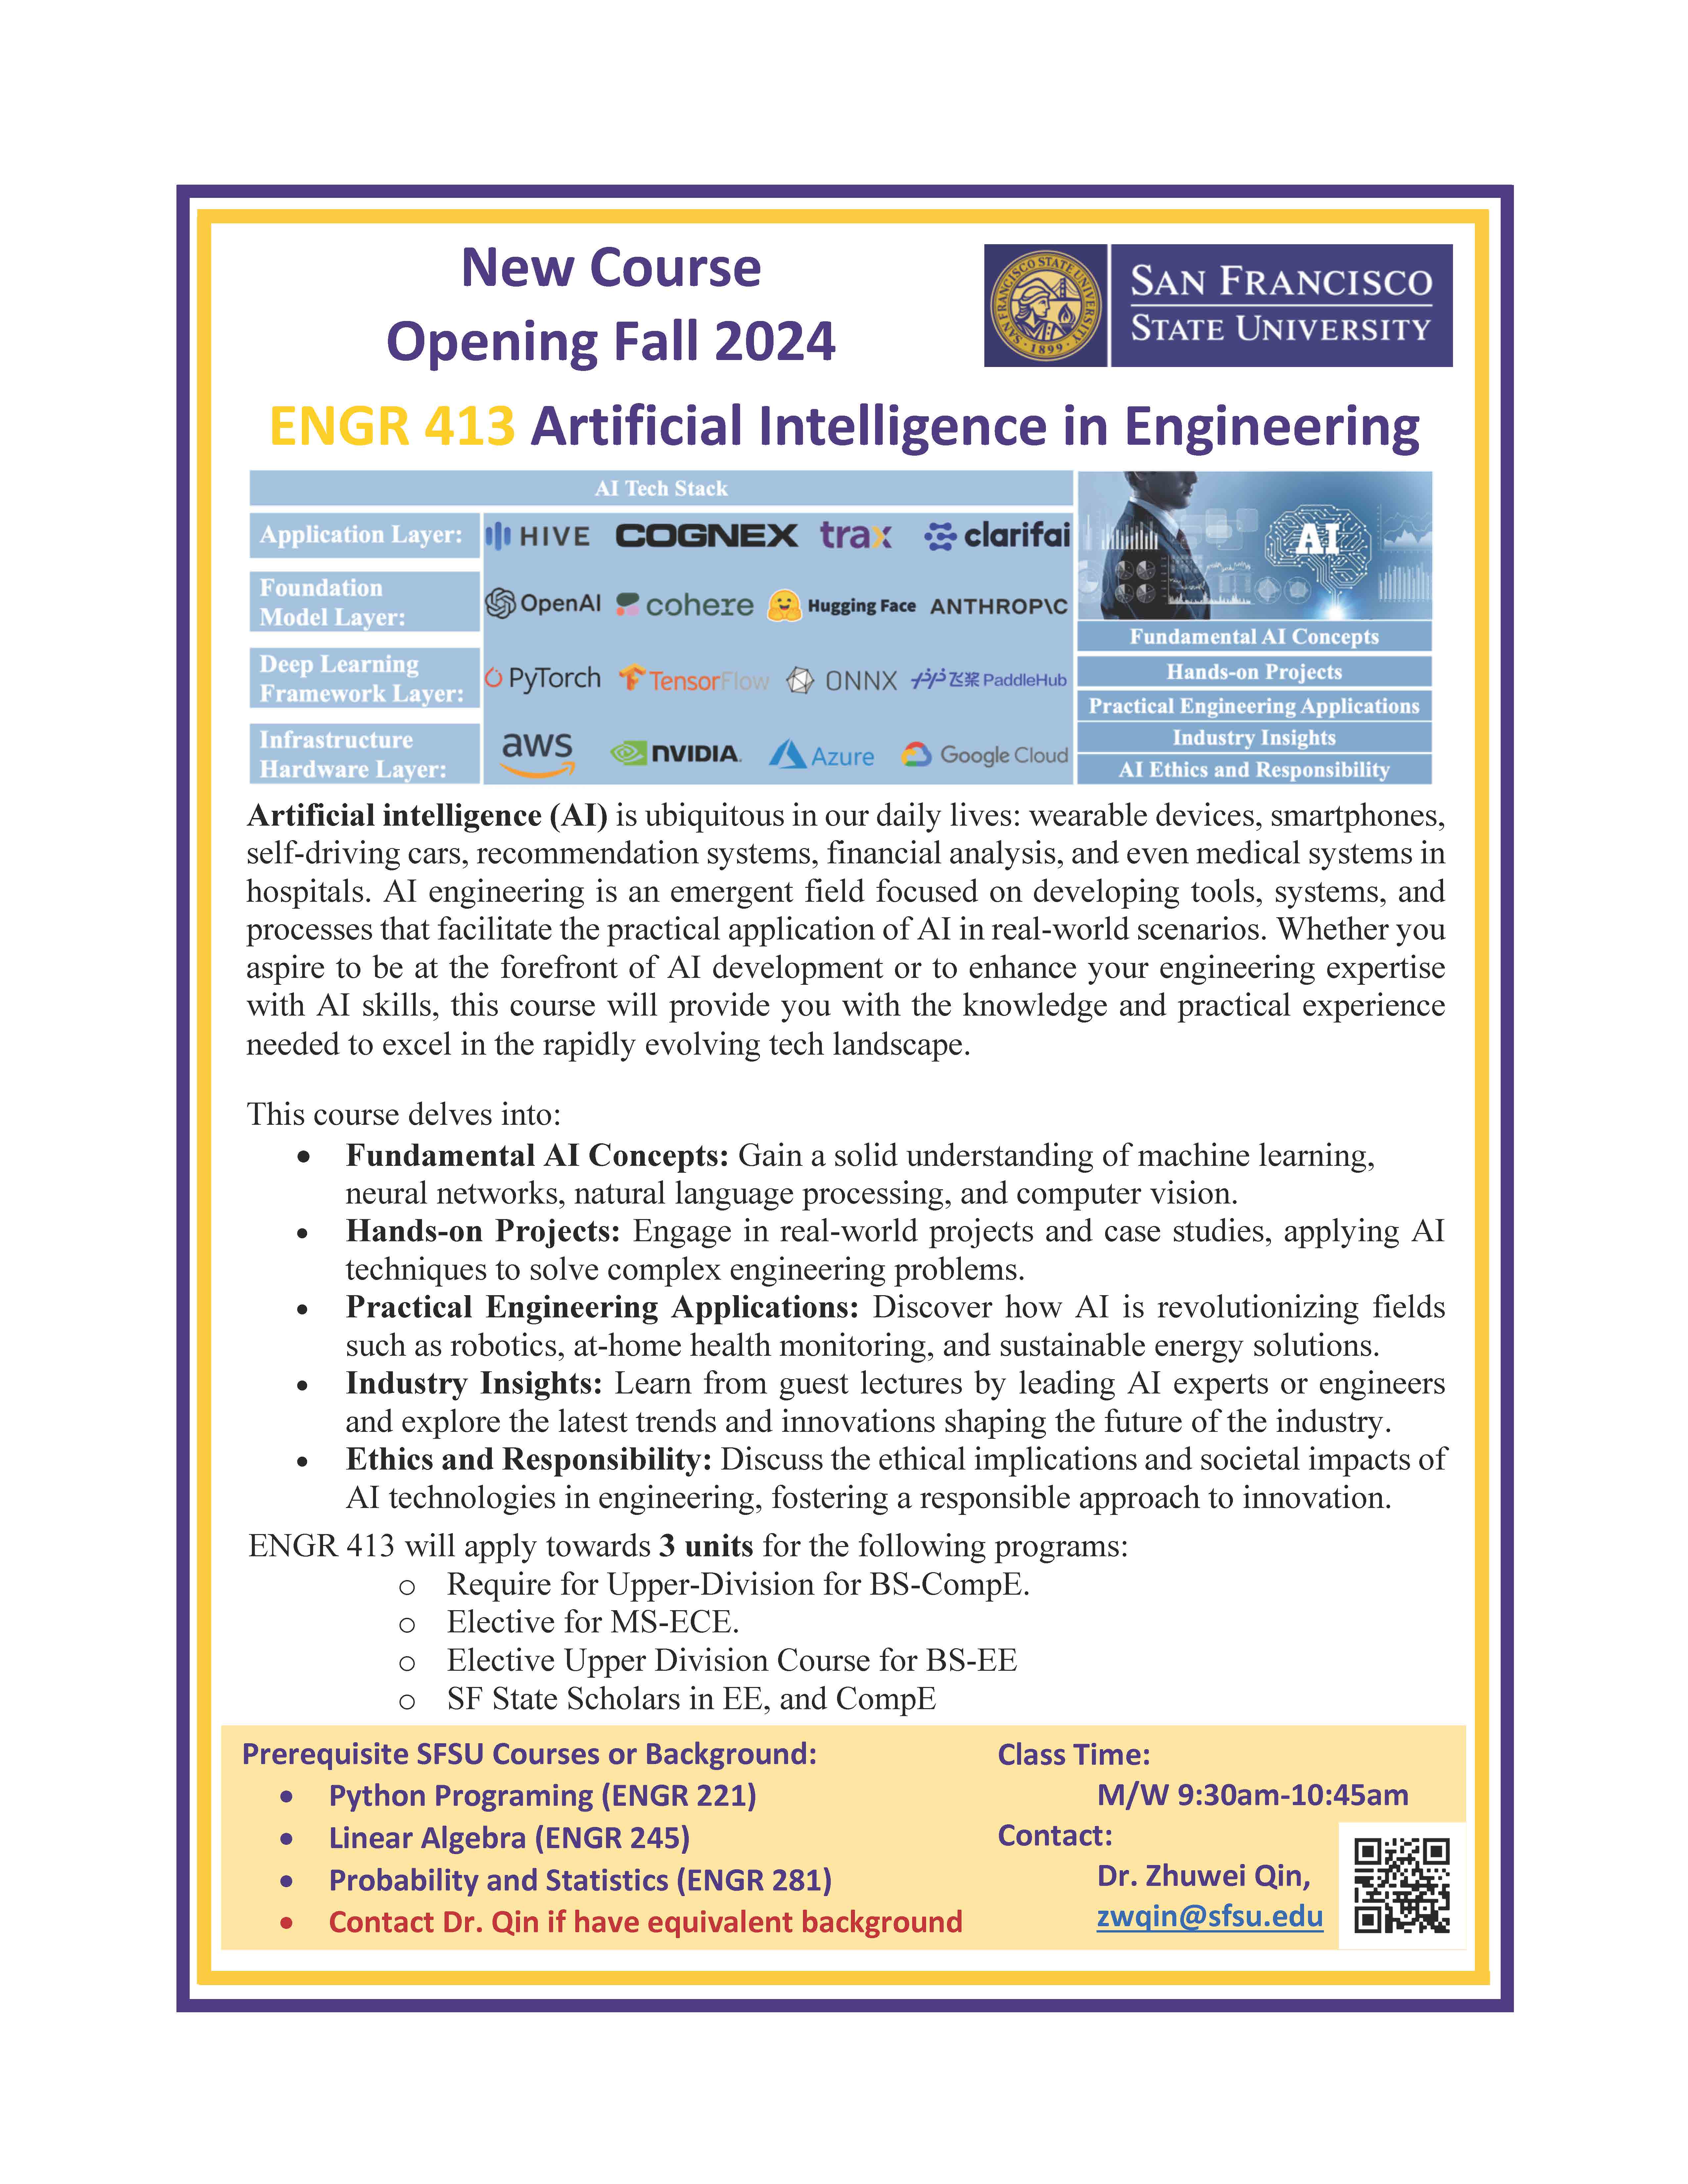 ENGR 413 Artificial Intelligence in Engineering Flyer for BS-Electrical Engineering, BS Computer Engineemring, Masters in Electrical and computer Engineering